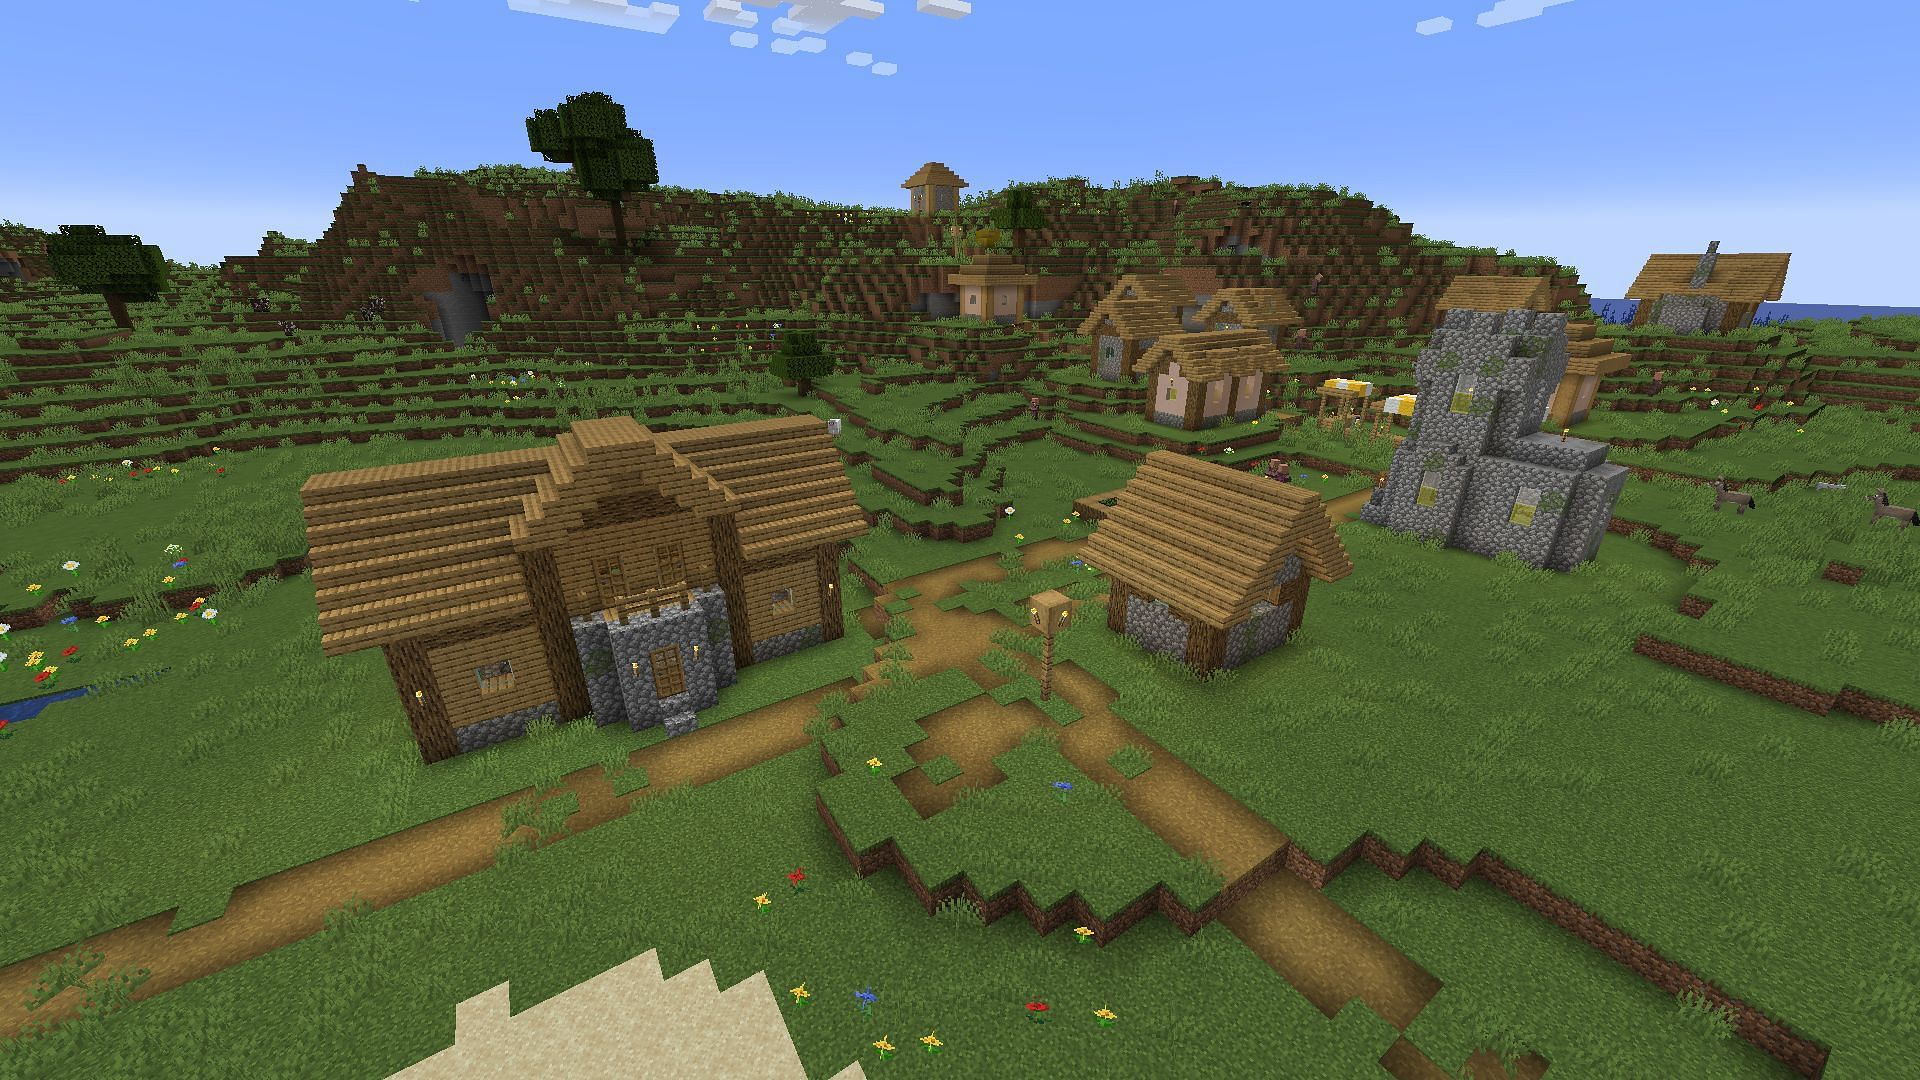 A variety of villages await Minecraft fans in this seed (Image via Mojang)